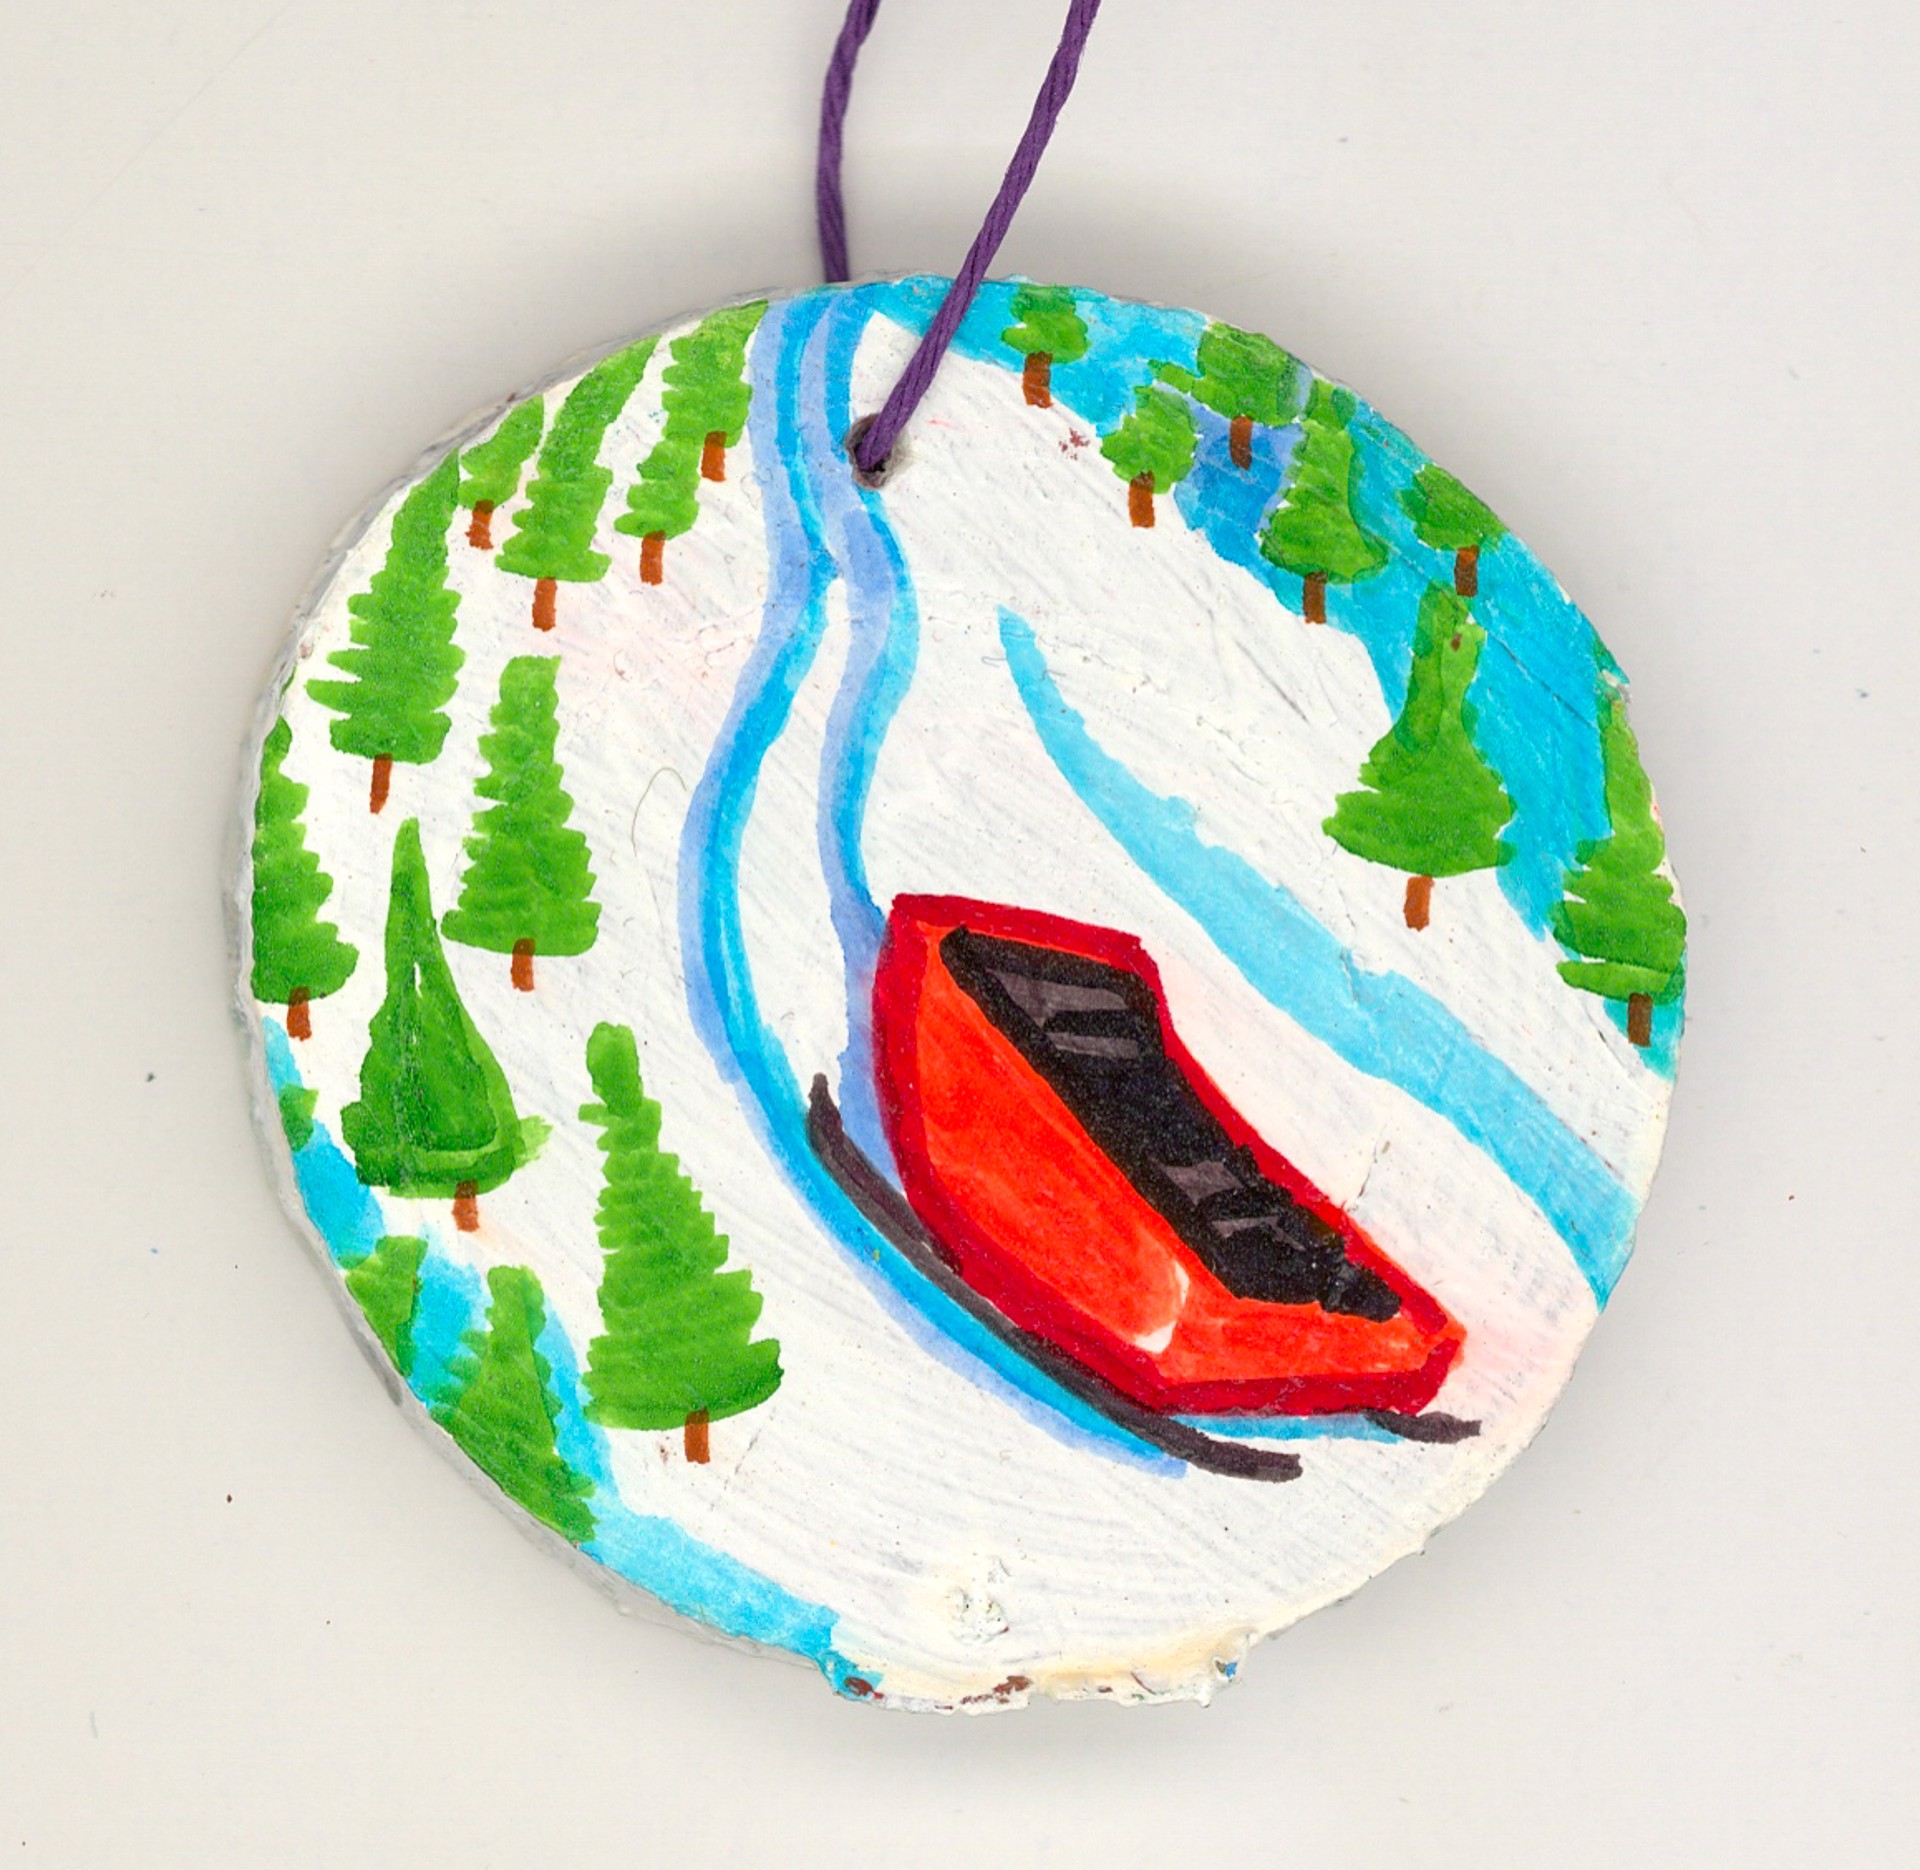 Sleigh Ride in the Snow (ornament) by CeeJ Maples